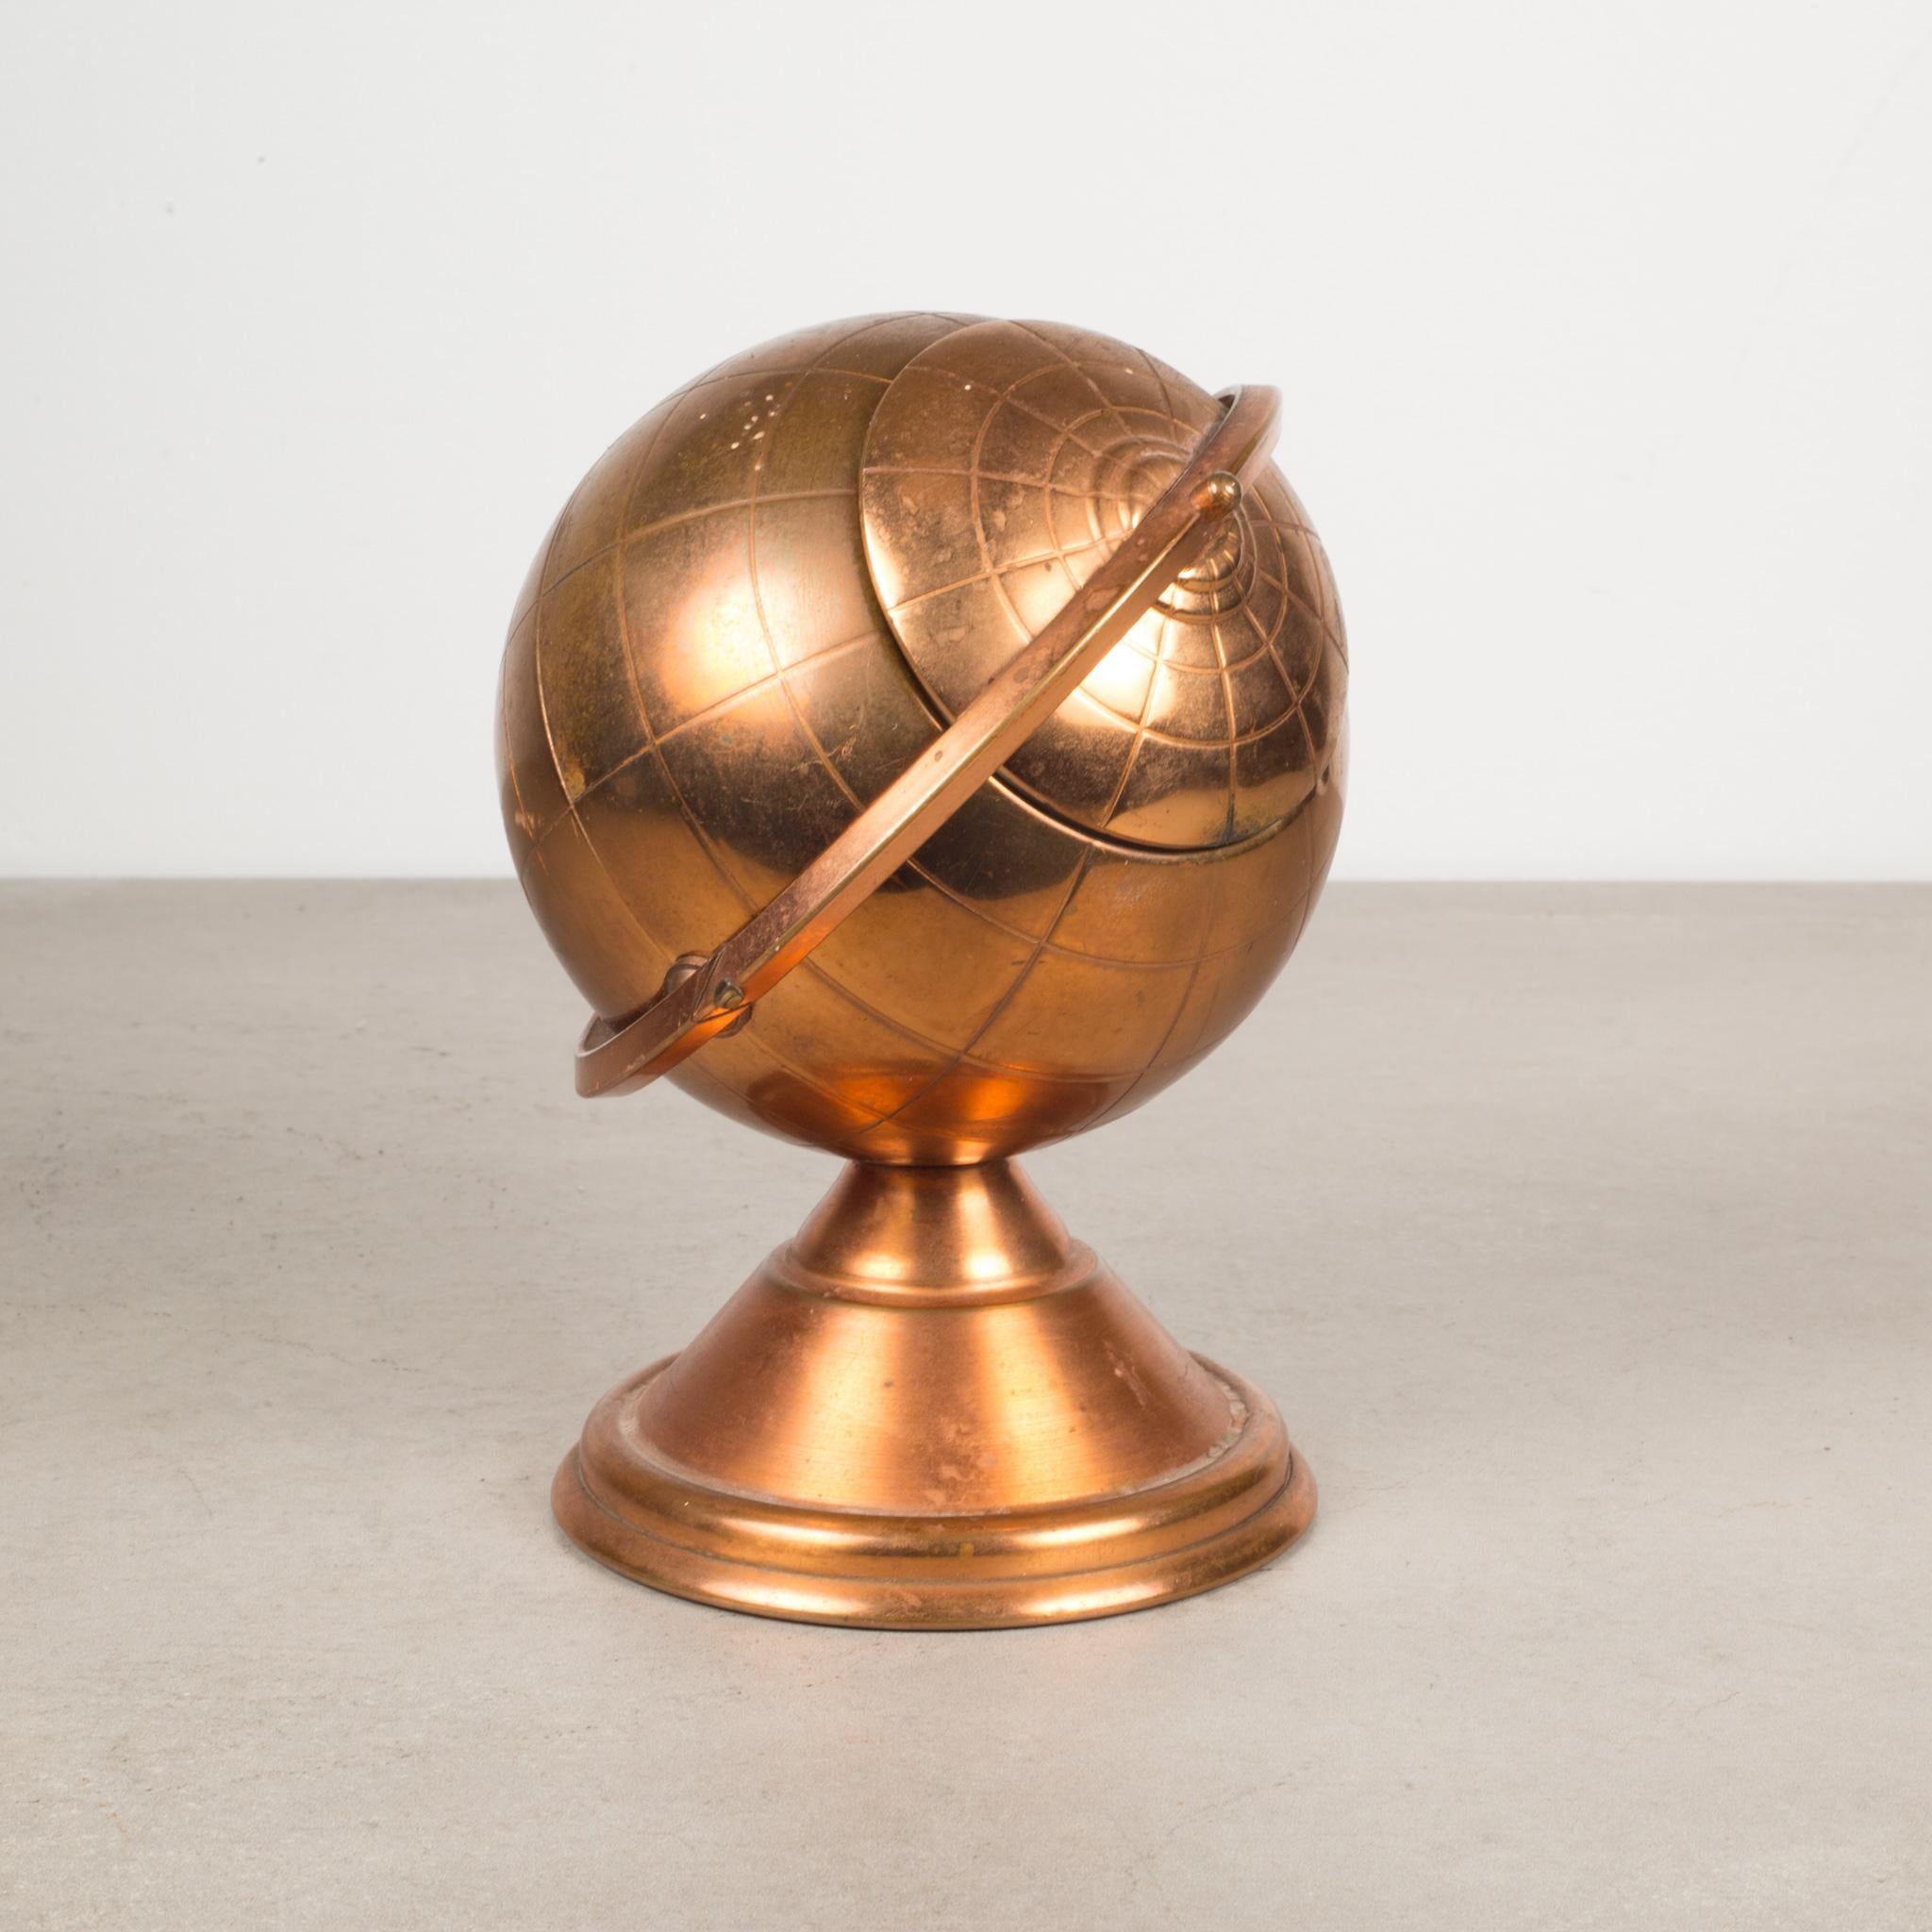 About

This is an original Mid-Century Modern copper cigarette holder. The lid slides open on the globe's axis to reveal a metal interior designed to hold cigarettes.

This piece has retained its original finish and has the appropriate finish